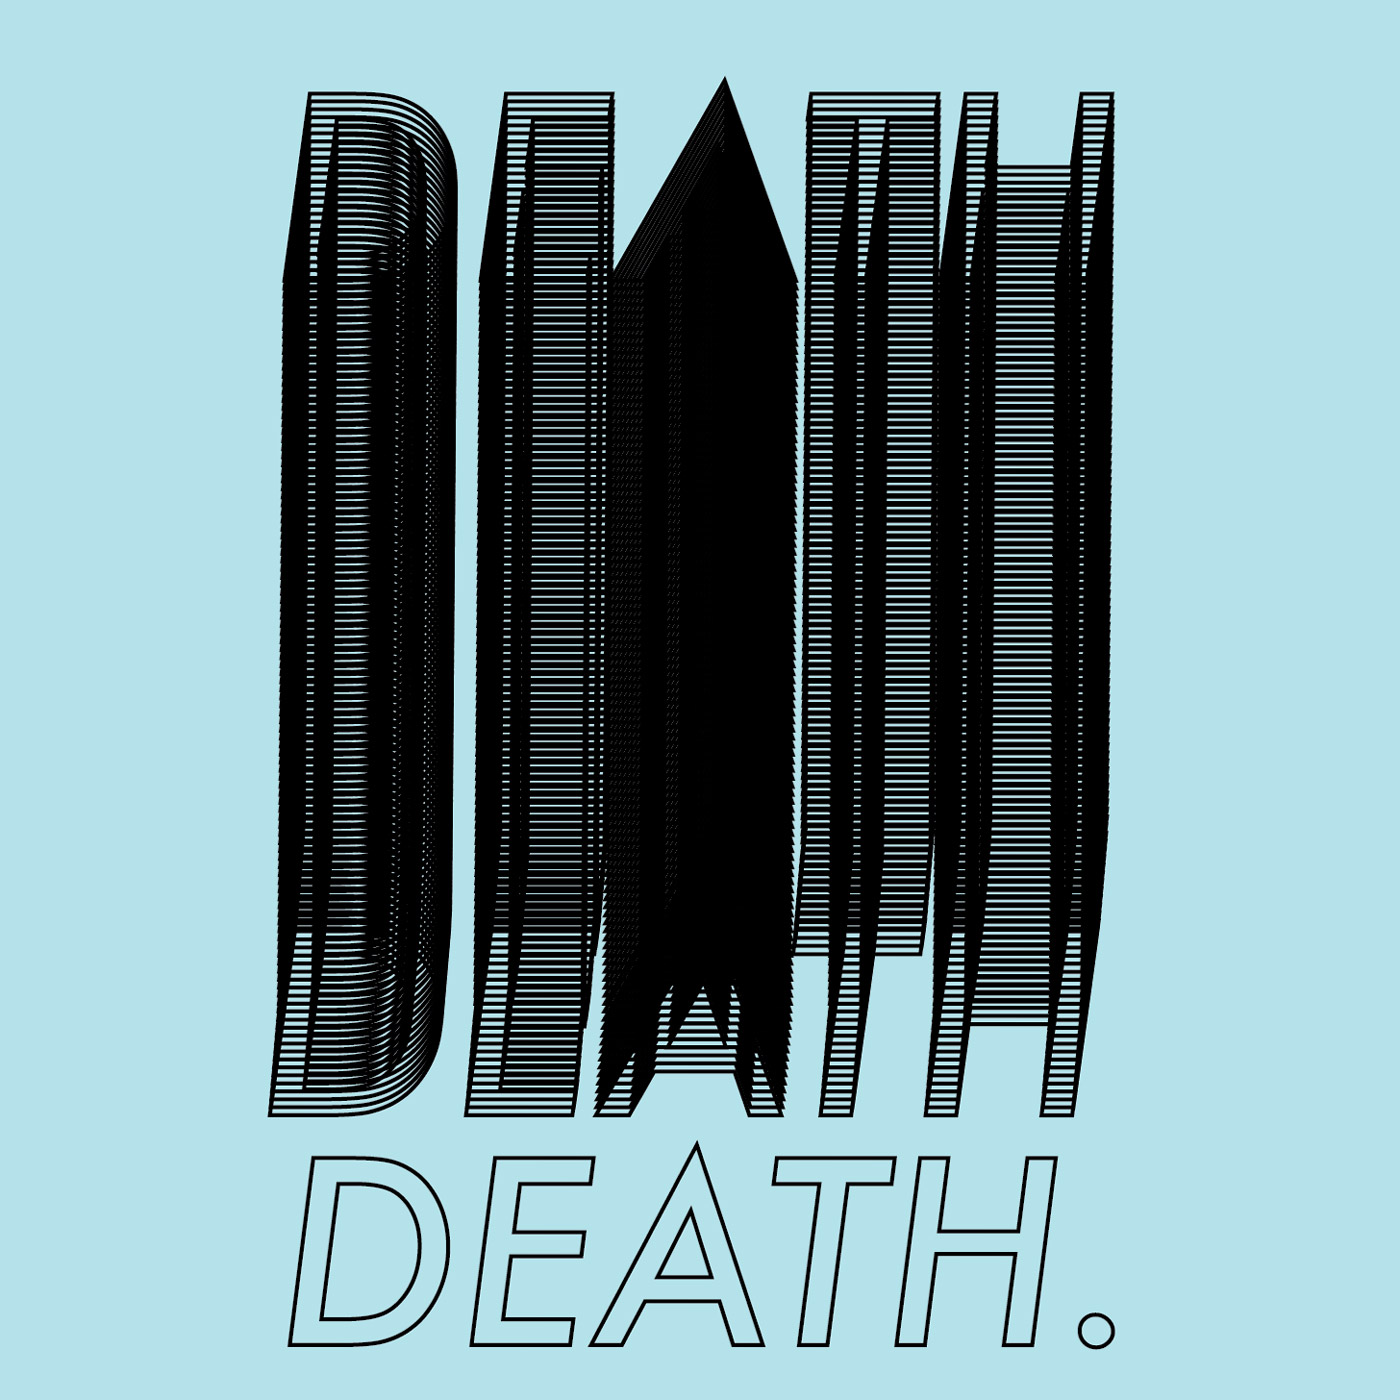 The word 'death' overlapped in black multiple times on a light blue background